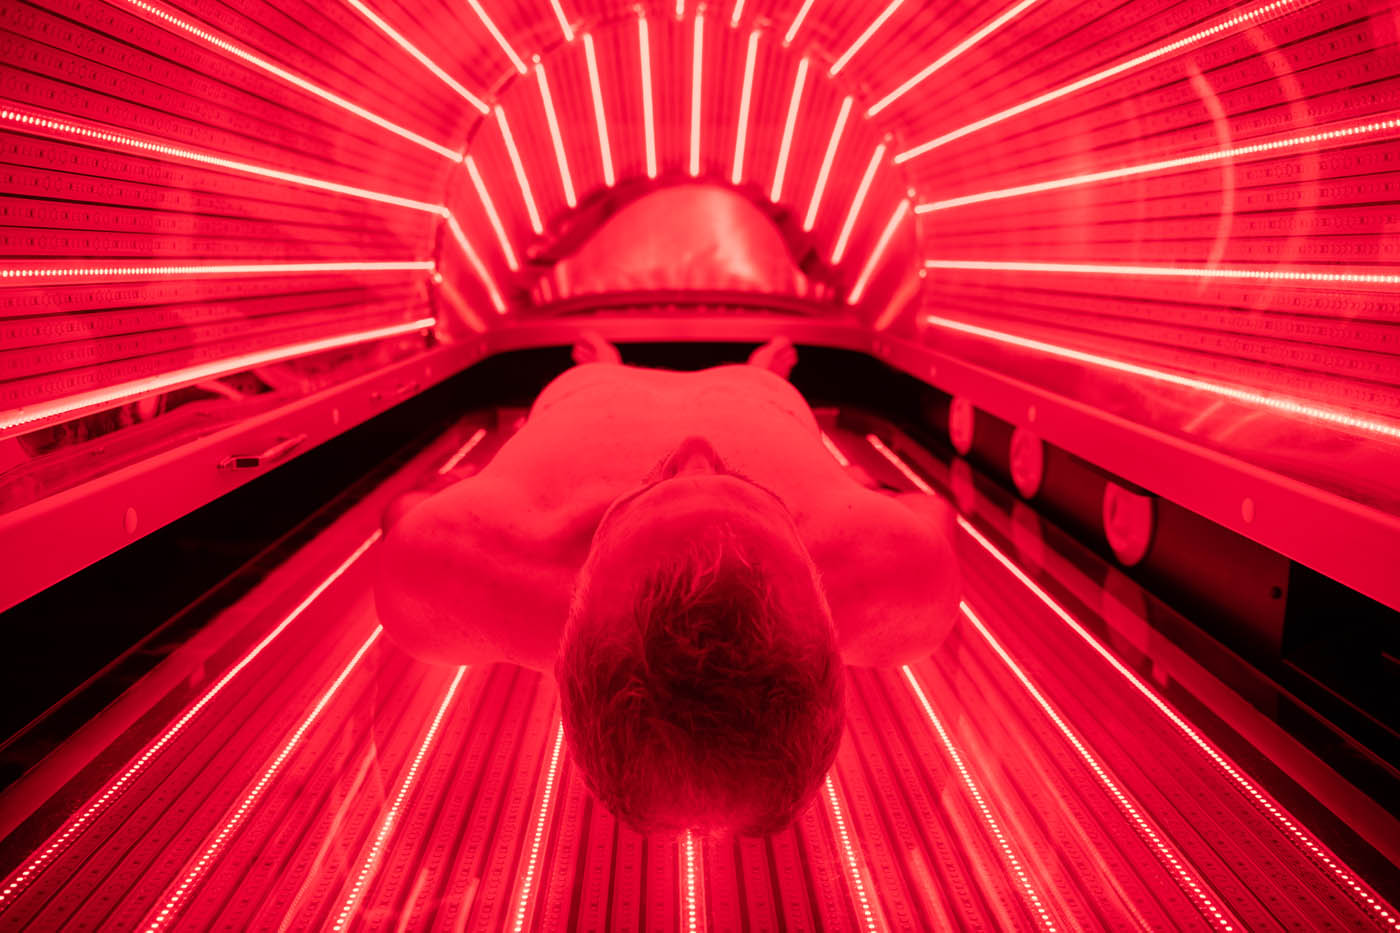 A man getting into a dark pod with bright red light, contact Light Lounge today for your infrared light therapy in your local area.